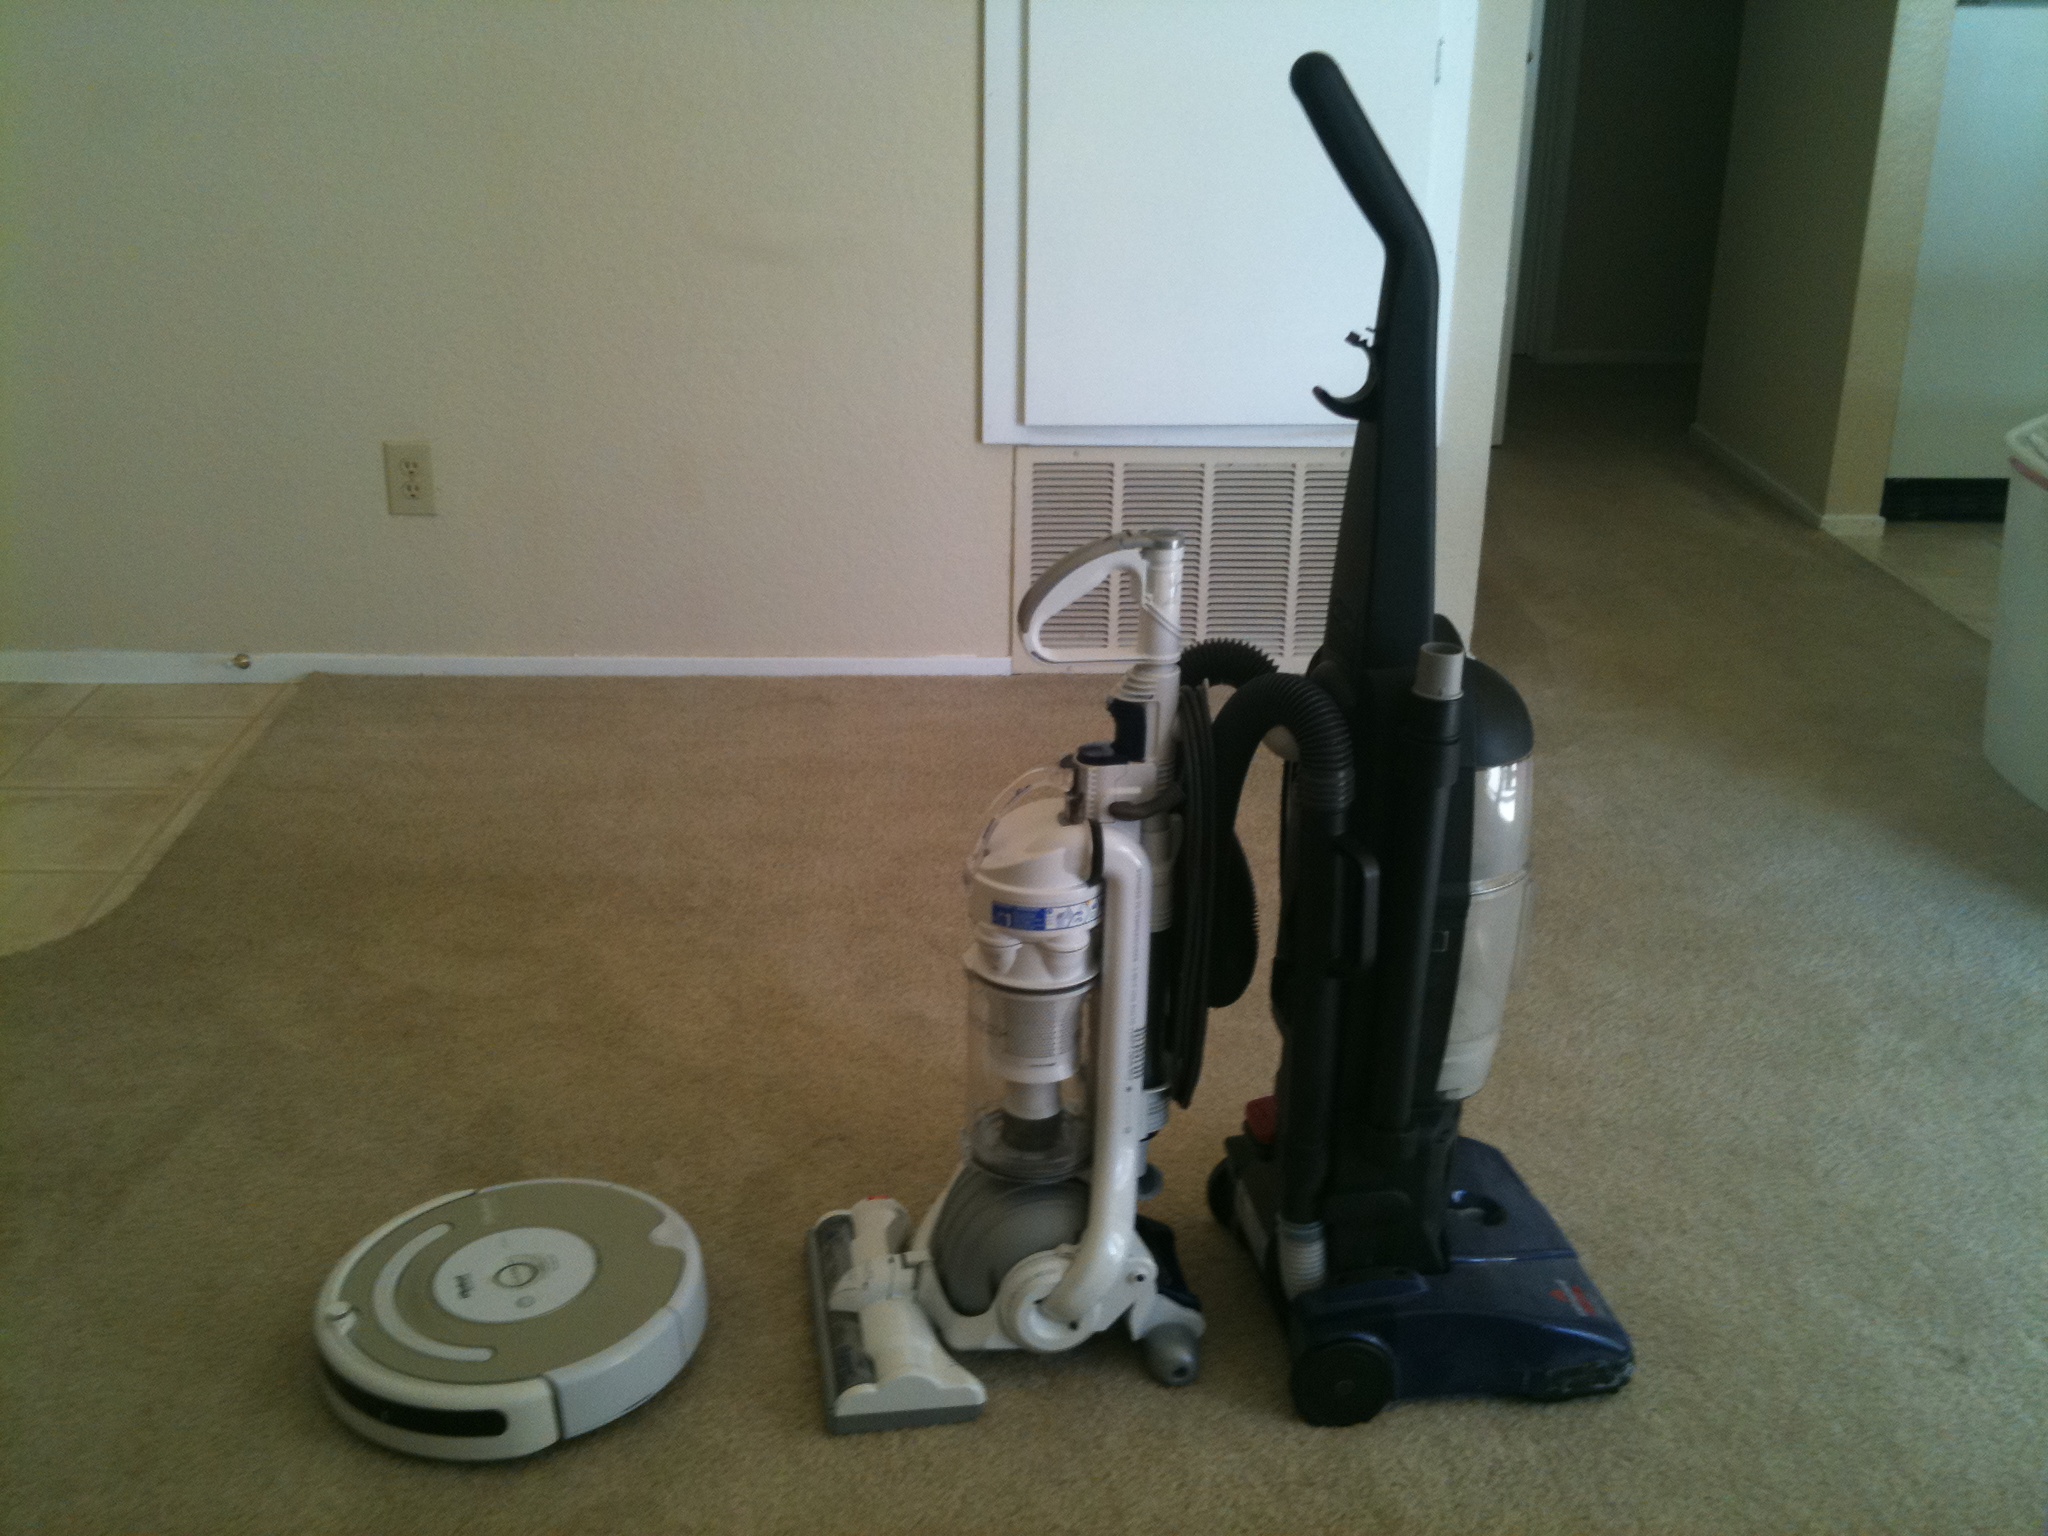 a very clean room with two vacuums next to it